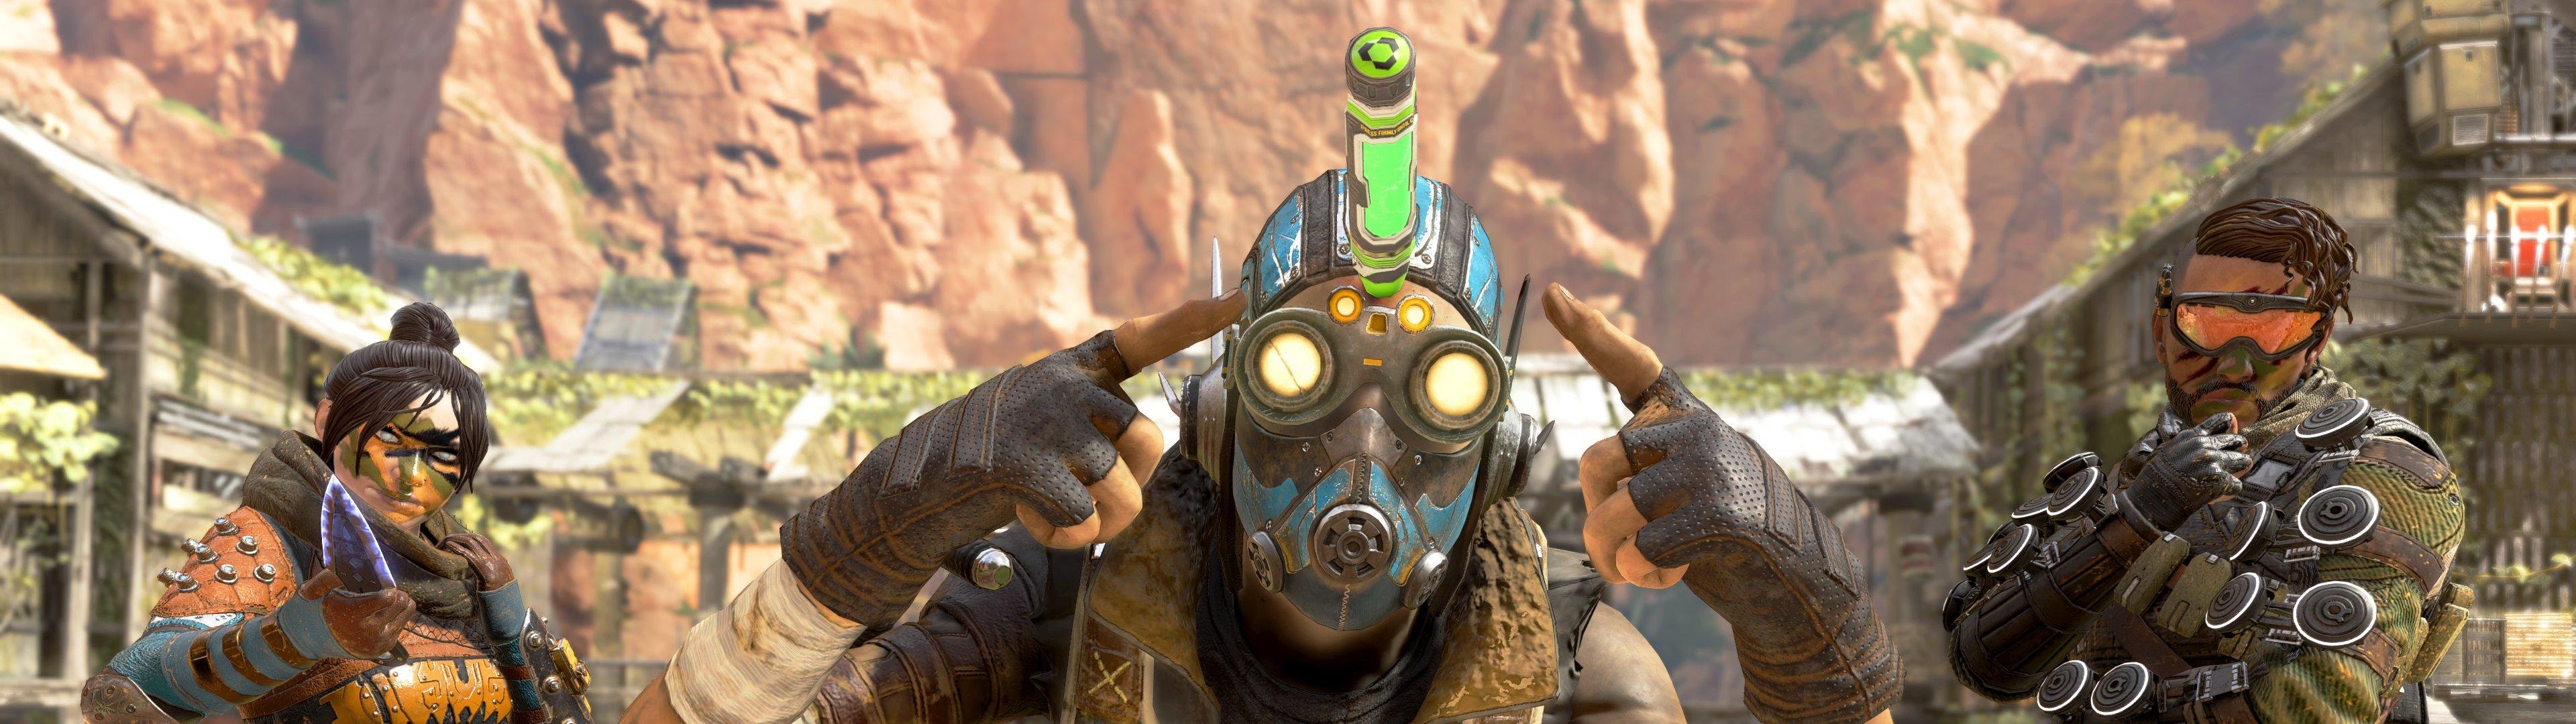 Featured image of post Apex Legends Wraith And Mirage Wallpaper Download apex legends minimal popular characters poster wallpaper for screen 480x800 nokia x x2 xl 520 620 820 samsung galaxy star ace creative uncut on instagram